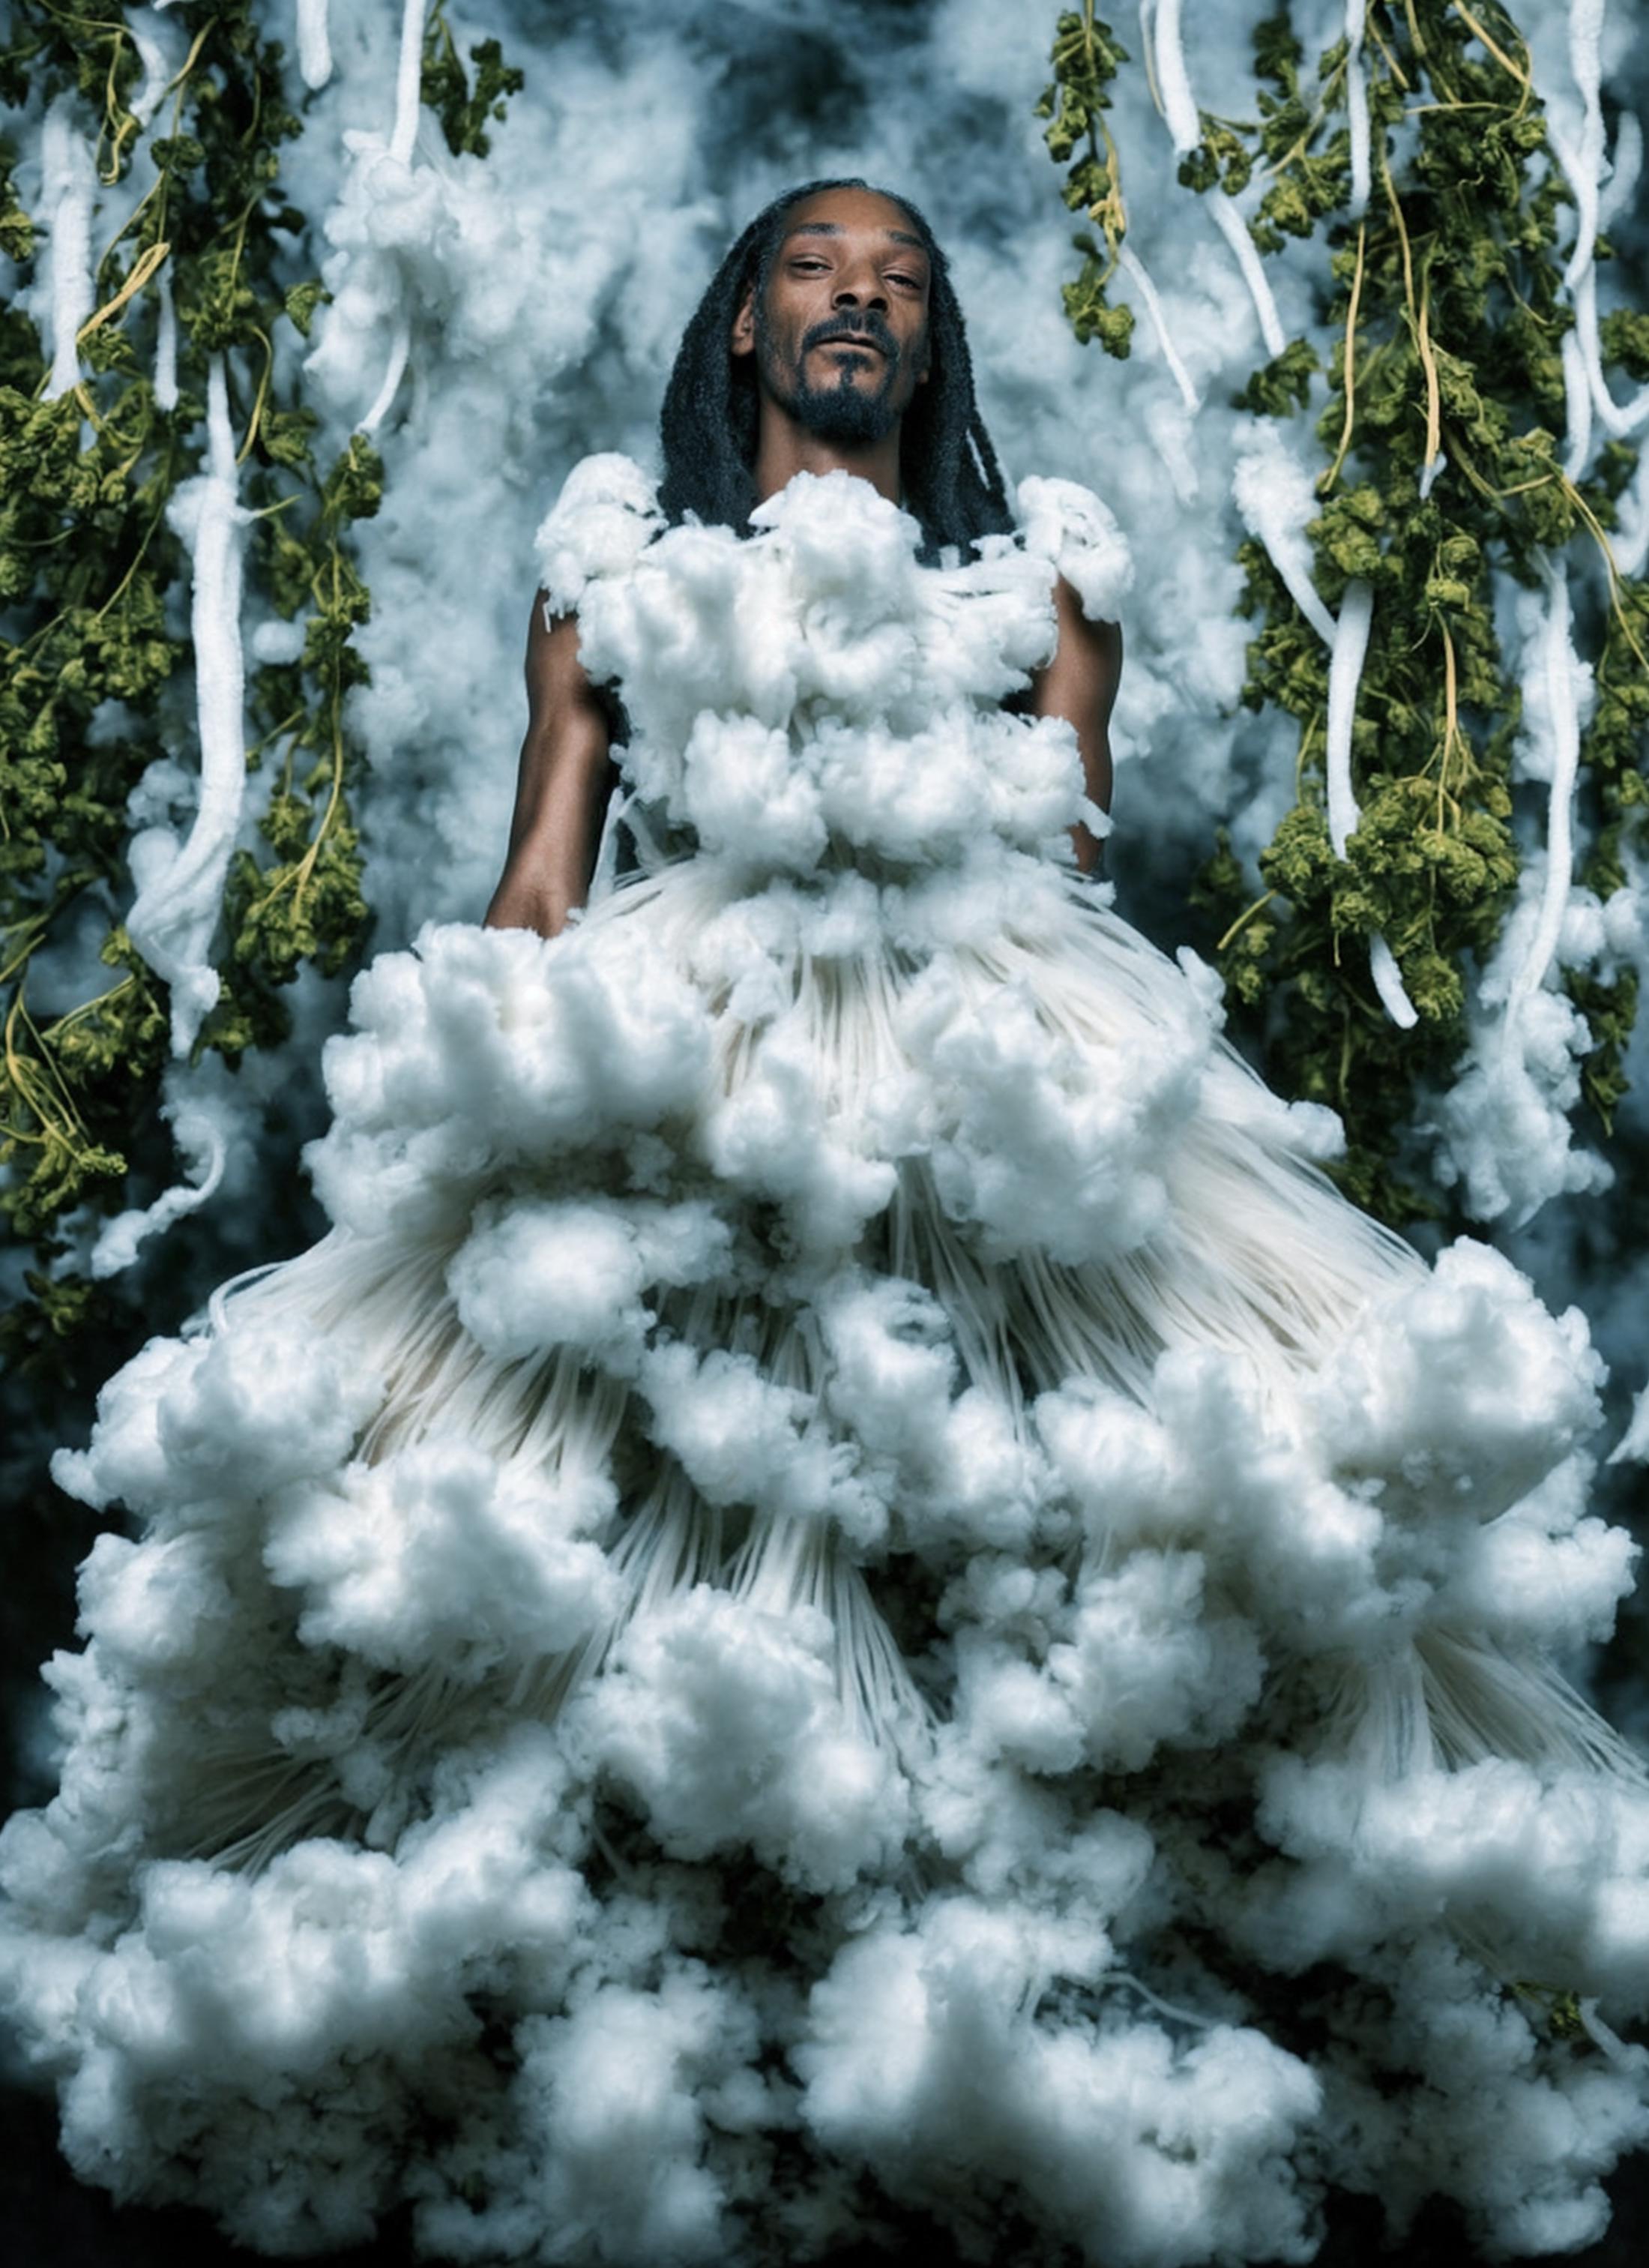 A man in a white dress, possibly a model, is surrounded by a cloud of white cotton or feathers. The dress appears to be made of cotton or white feathers, giving it a unique and interesting appearance. The setting is in front of a backdrop of greenery, adding a touch of nature to the scene.